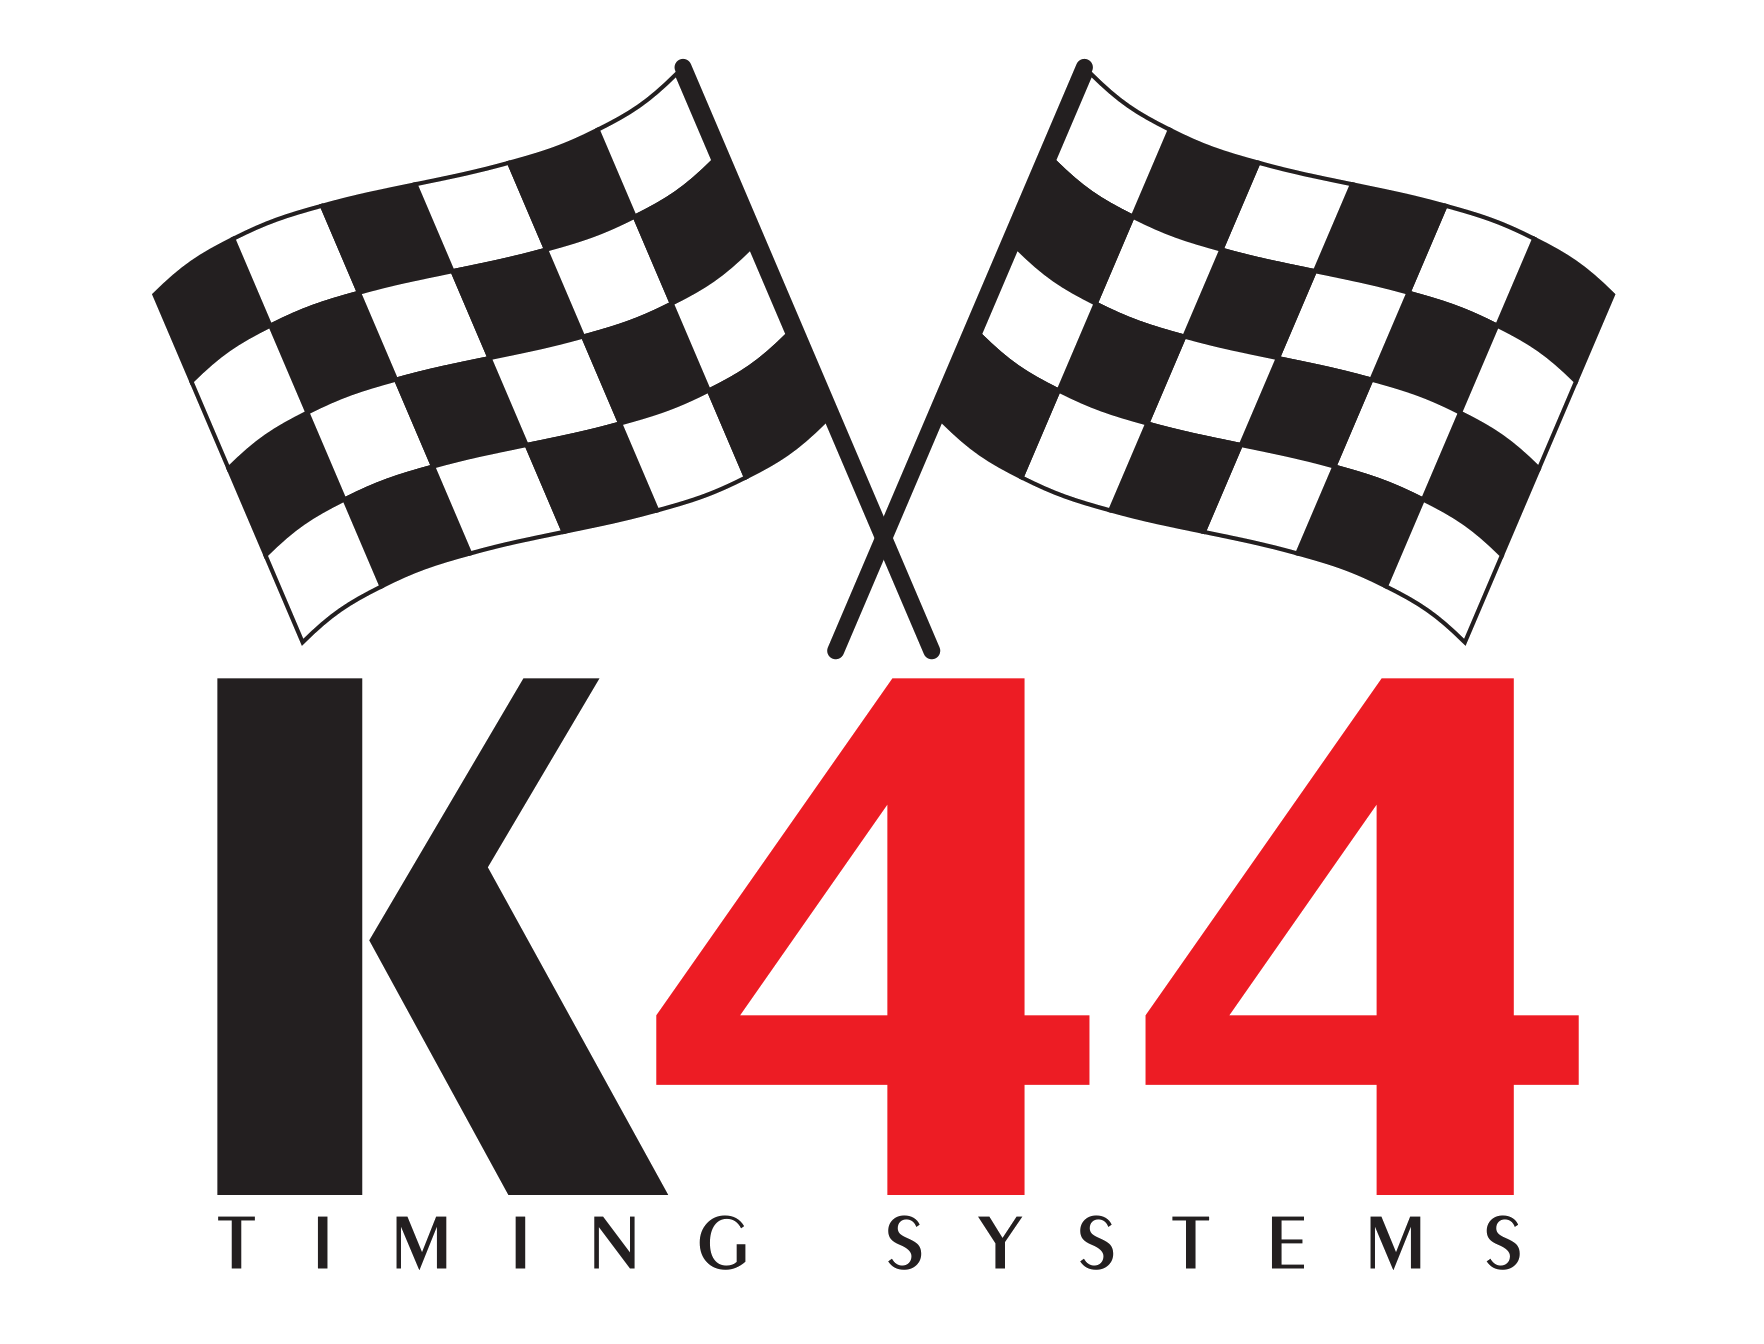 K44 Timing Systems